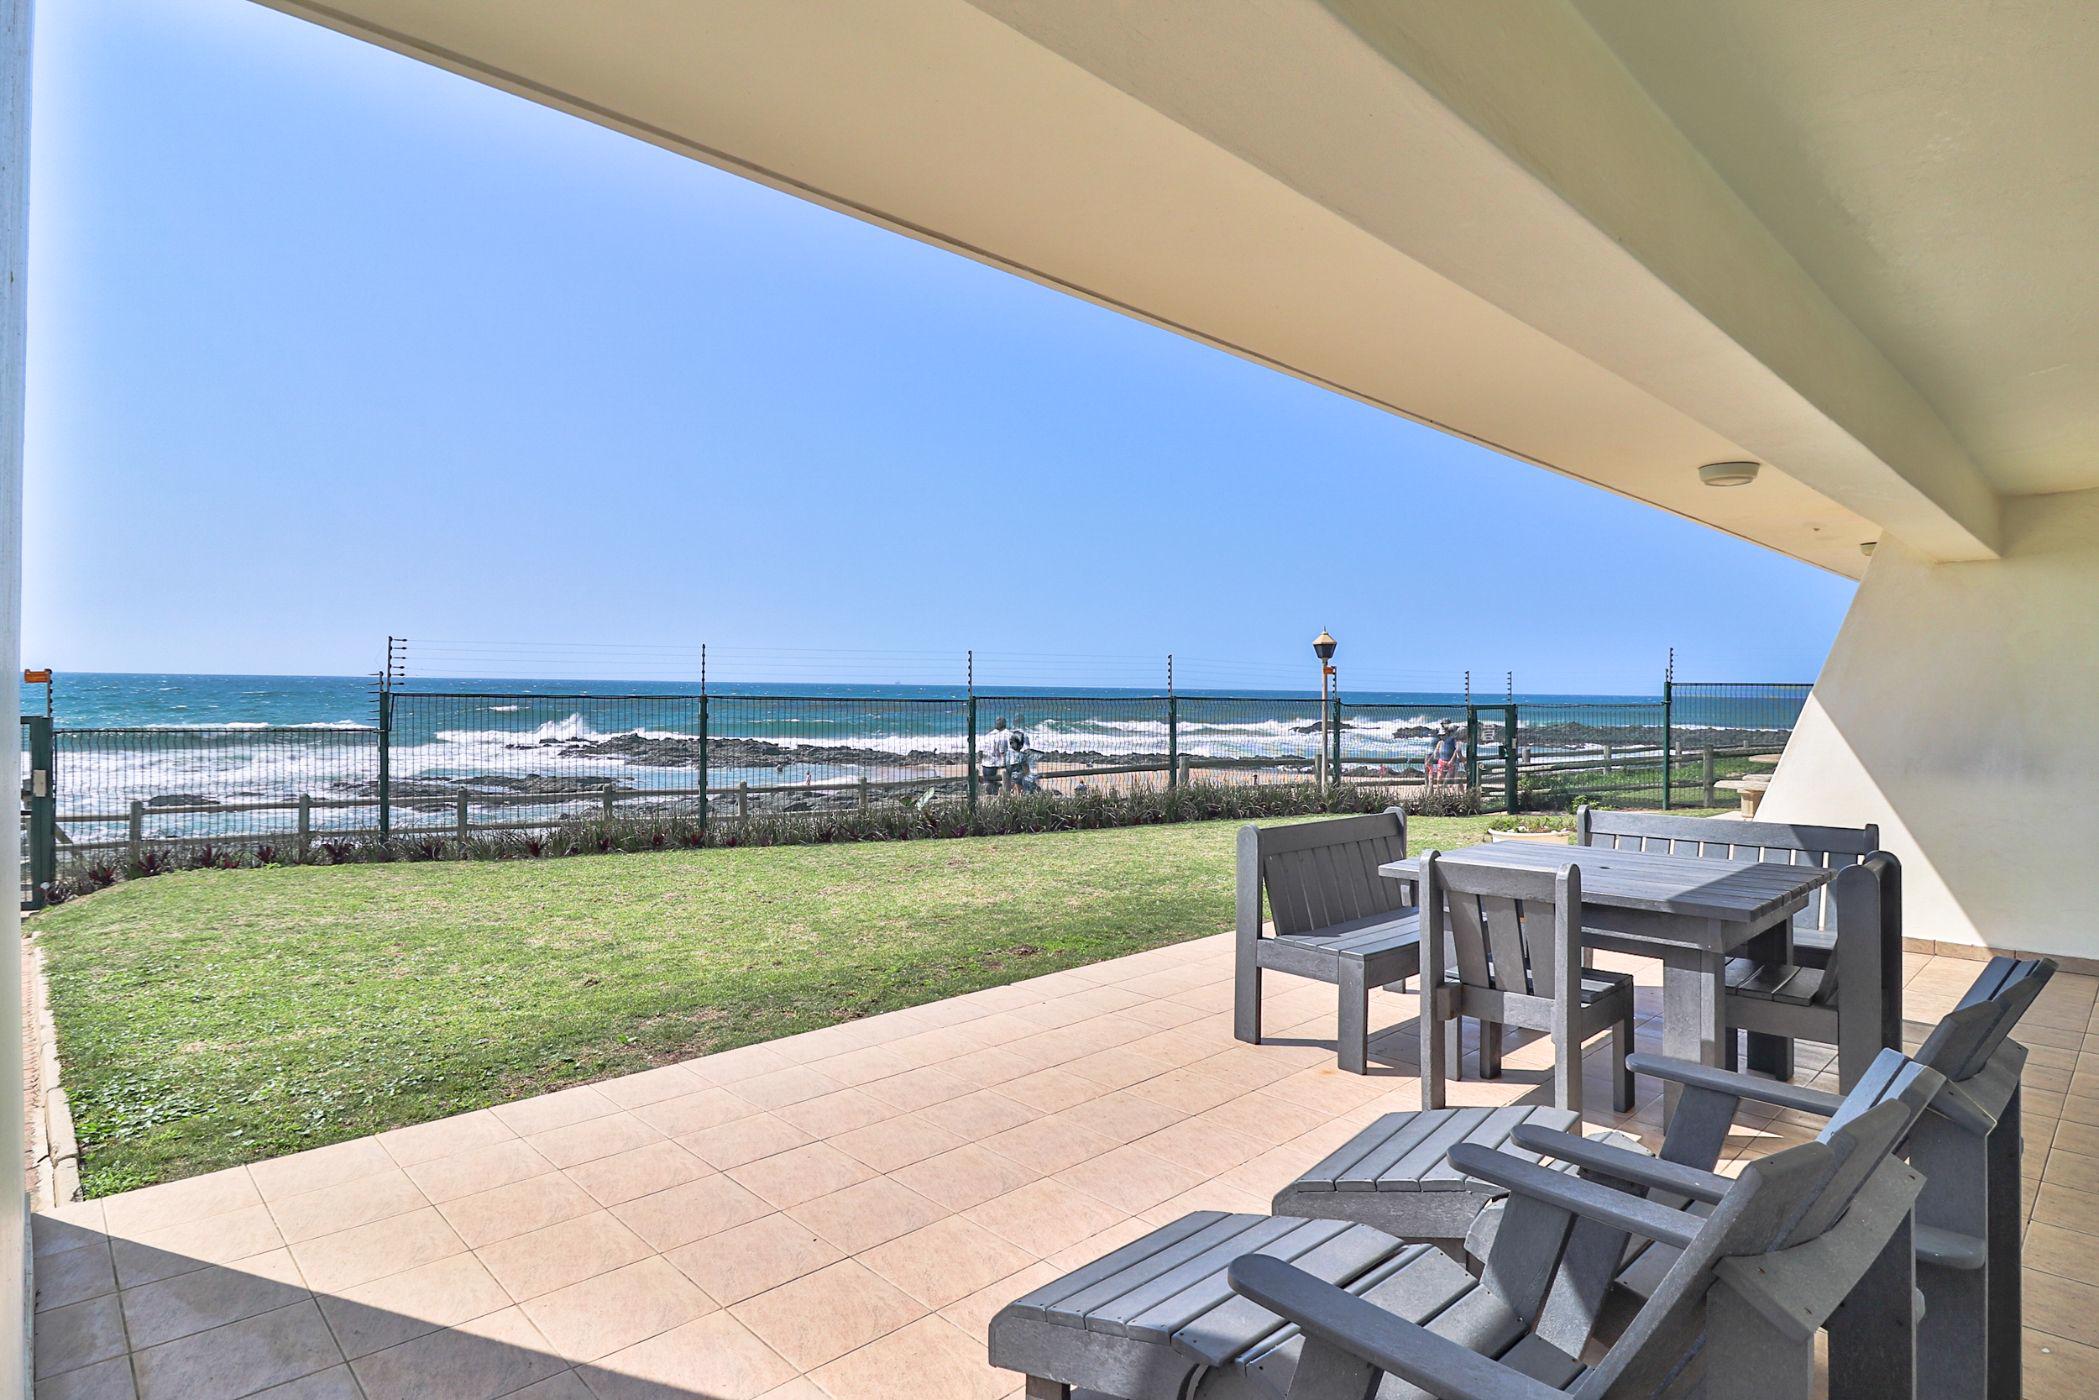 3 bedroom apartment for sale in Ballito